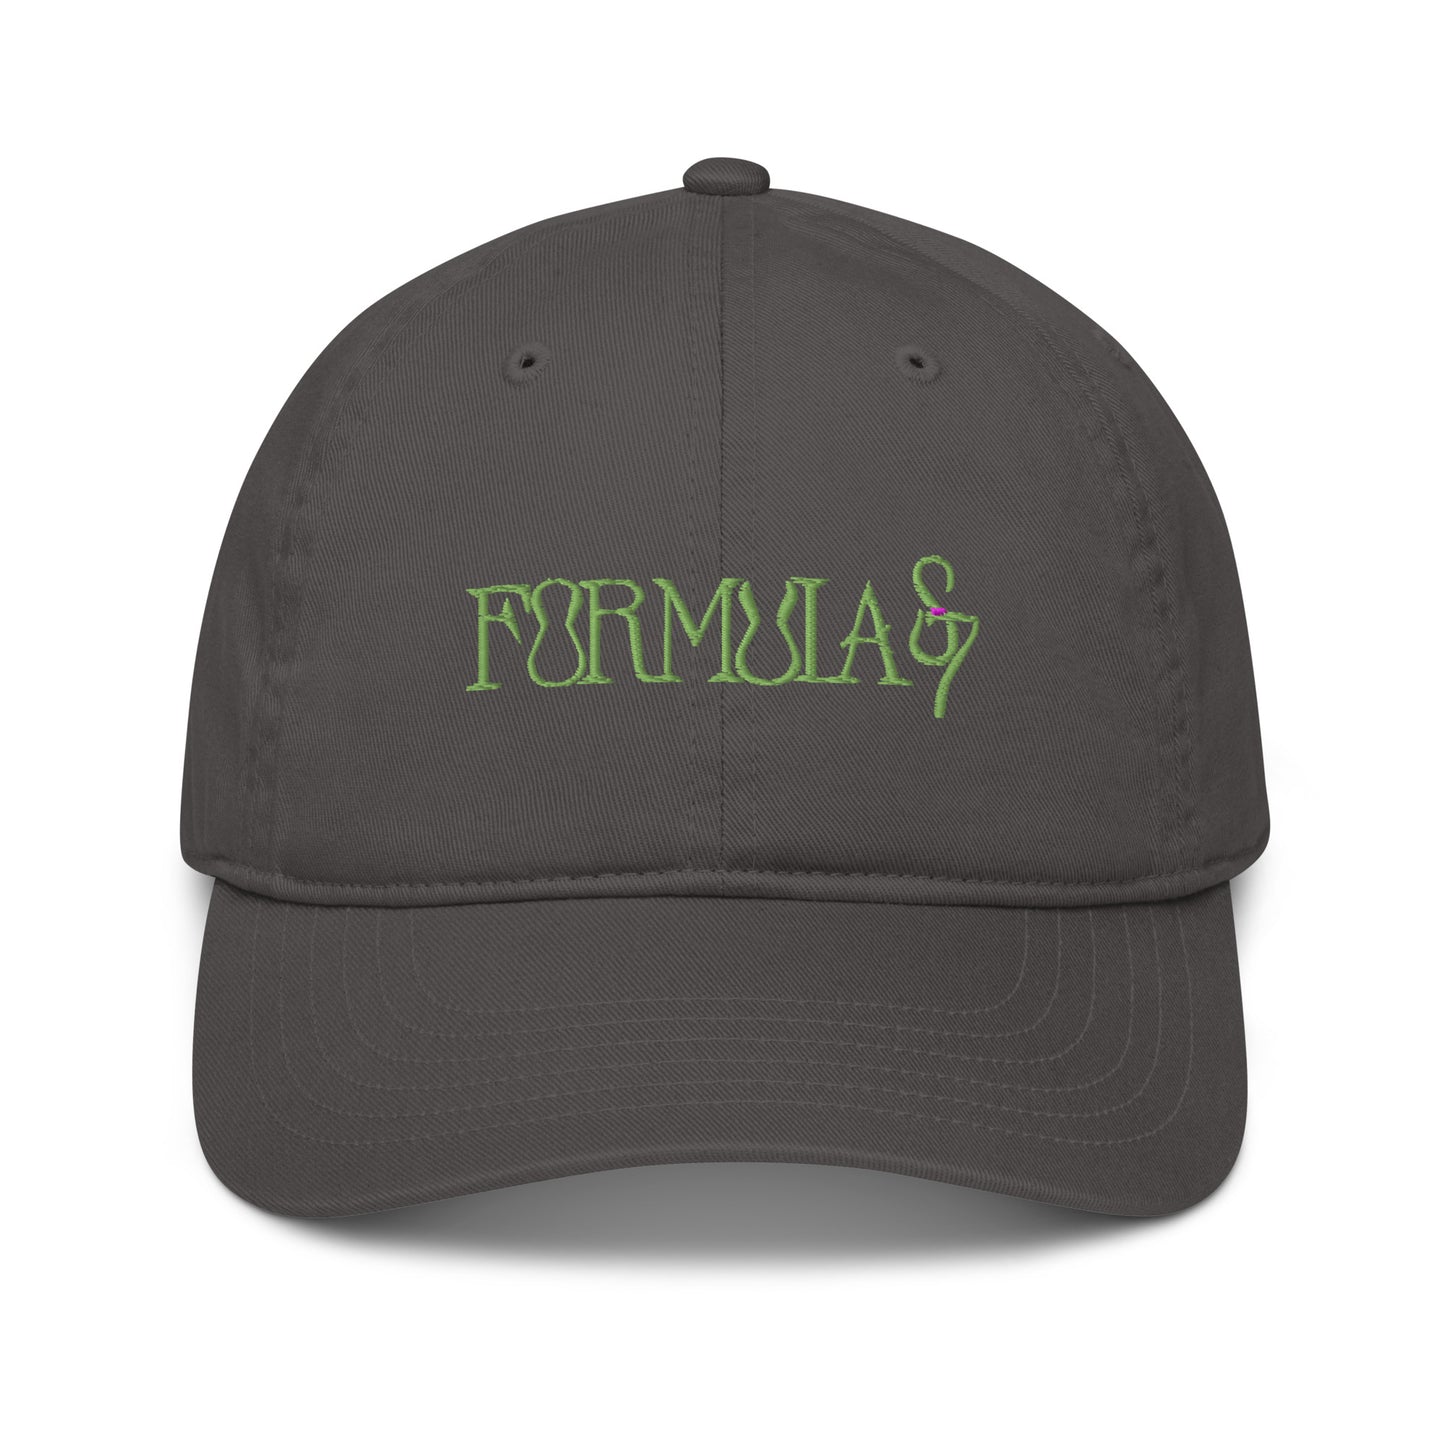 Formula S7 Green Embroidery Organic dad hat